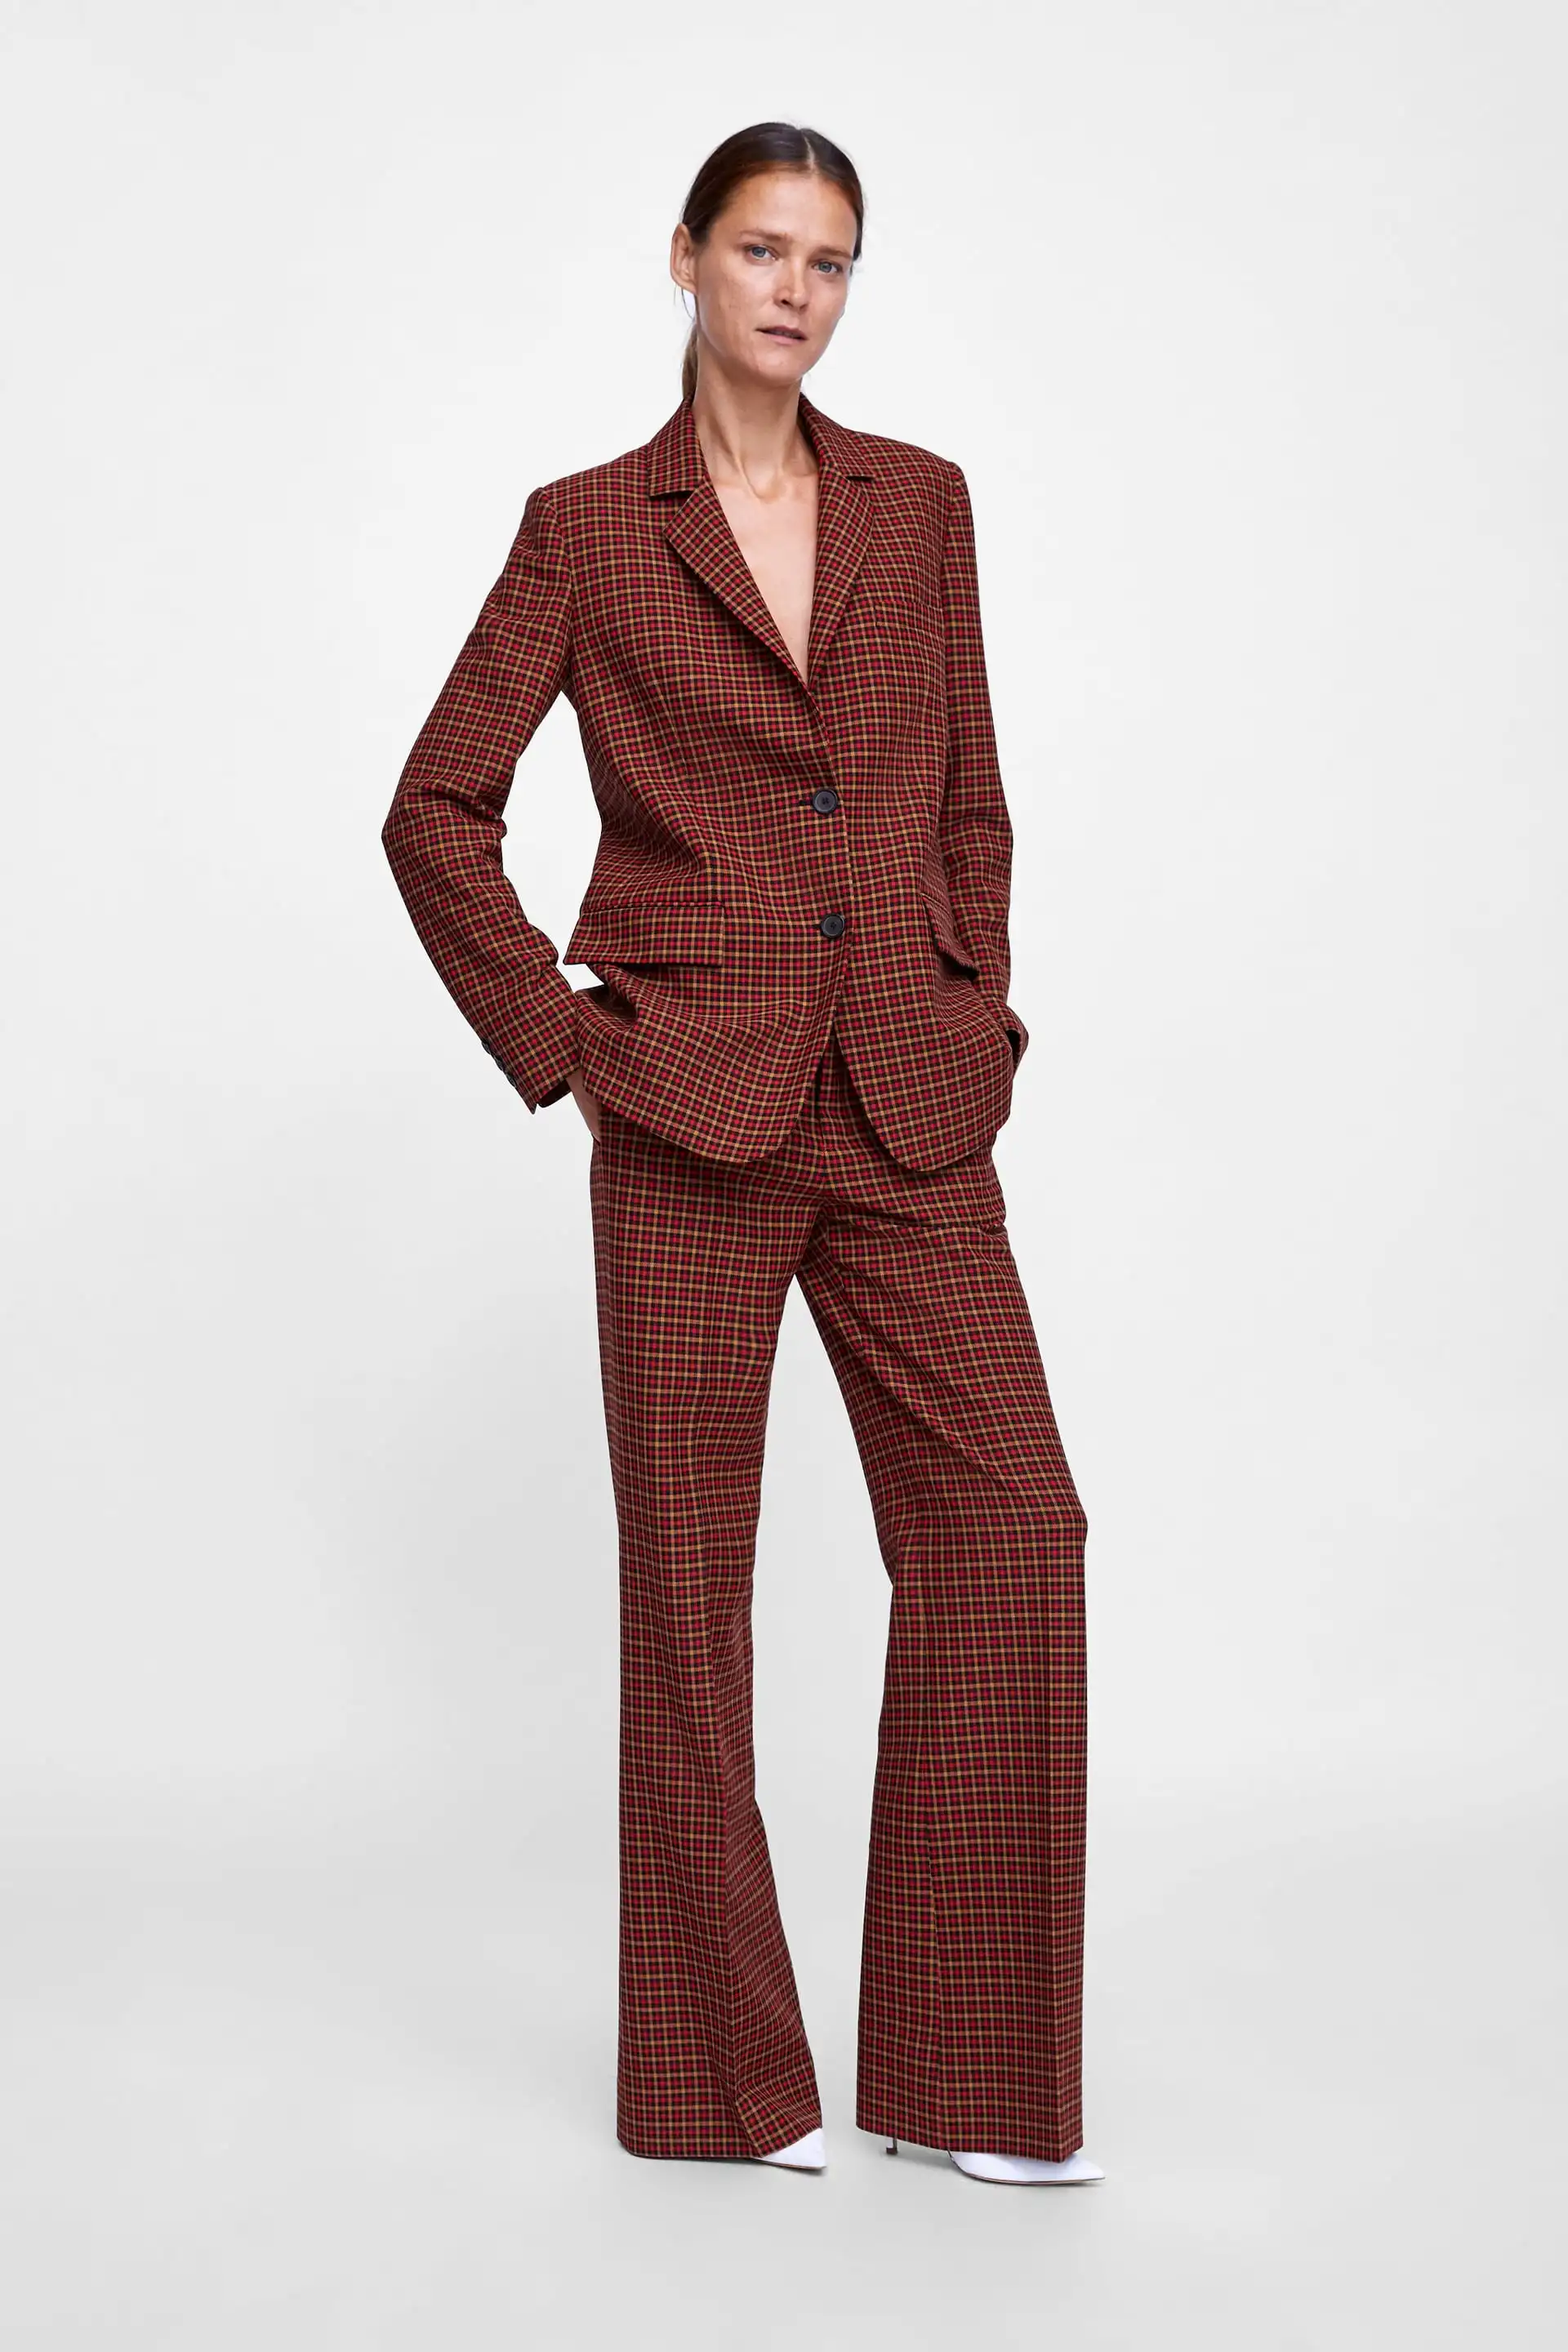 fashionable suits for ladies